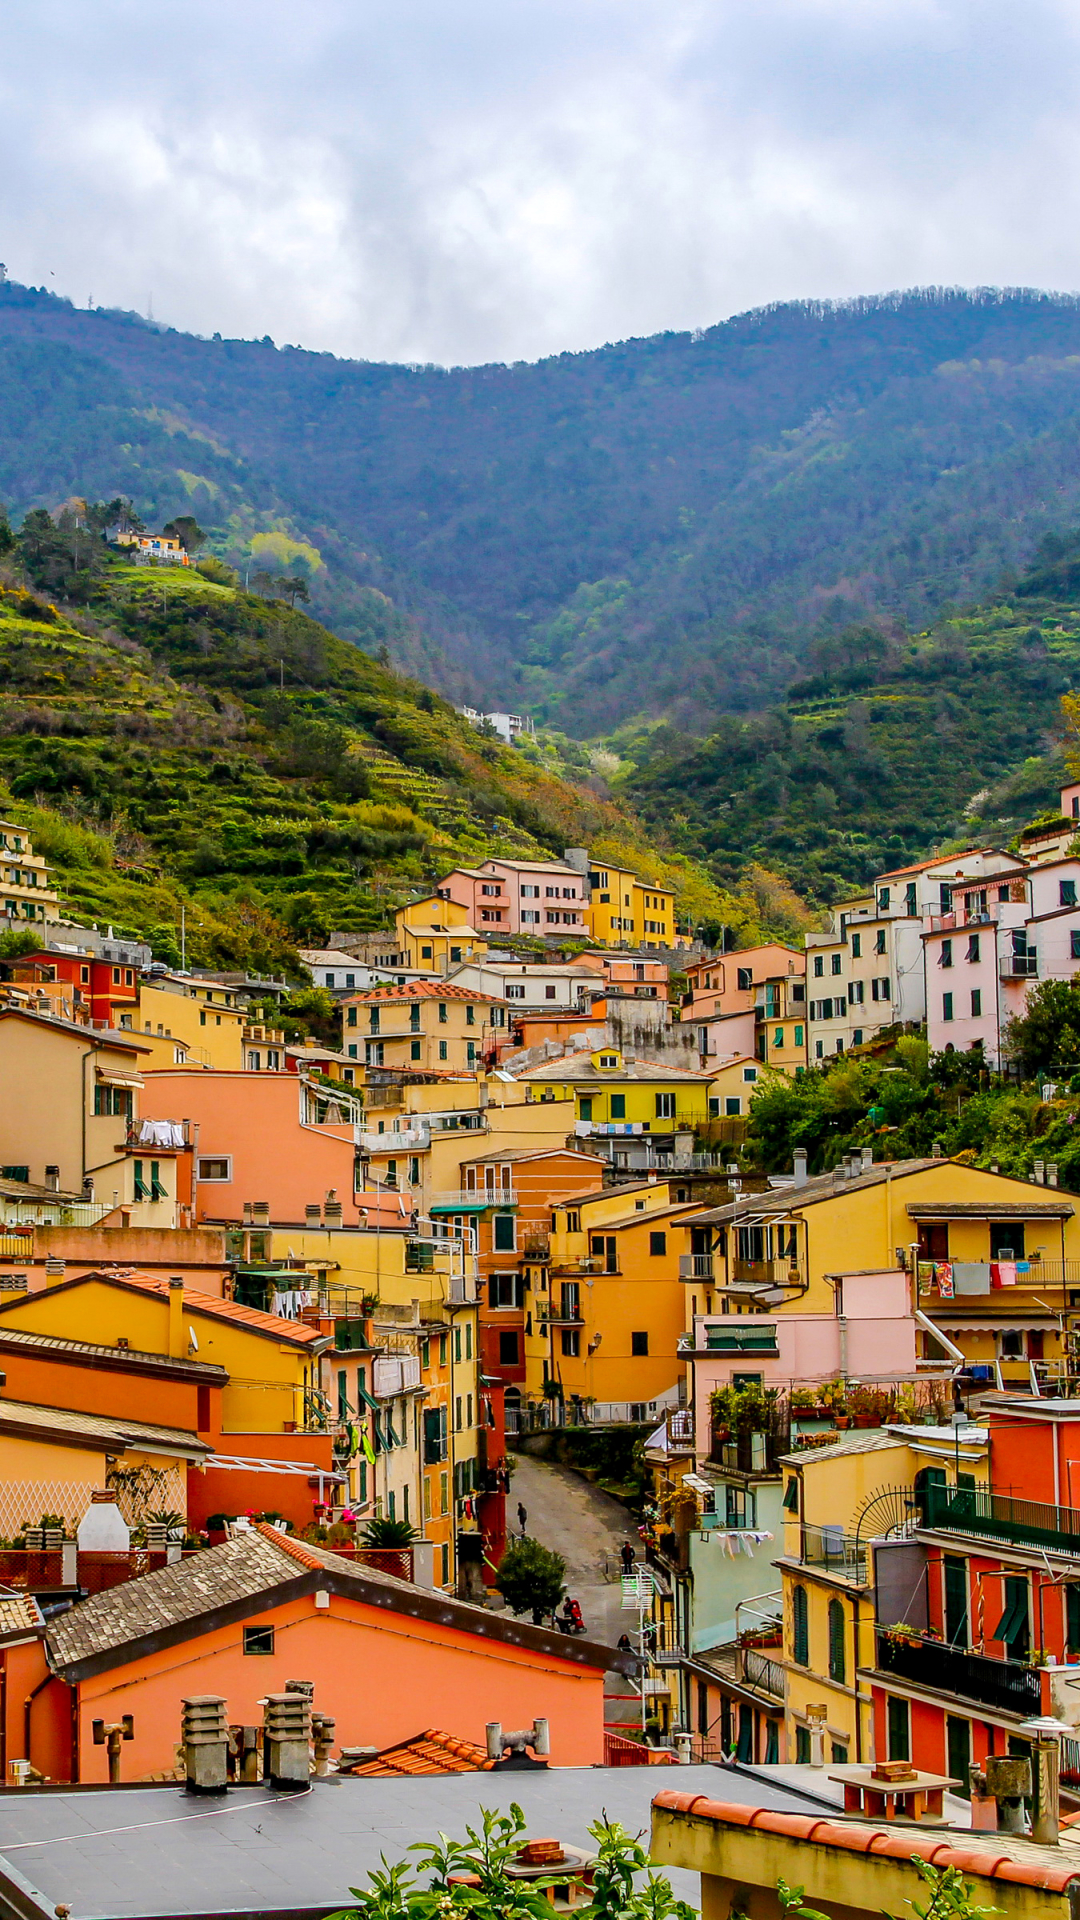 man made, manarola, colors, cinque terre, colorful, italy, mountain, village, house, towns